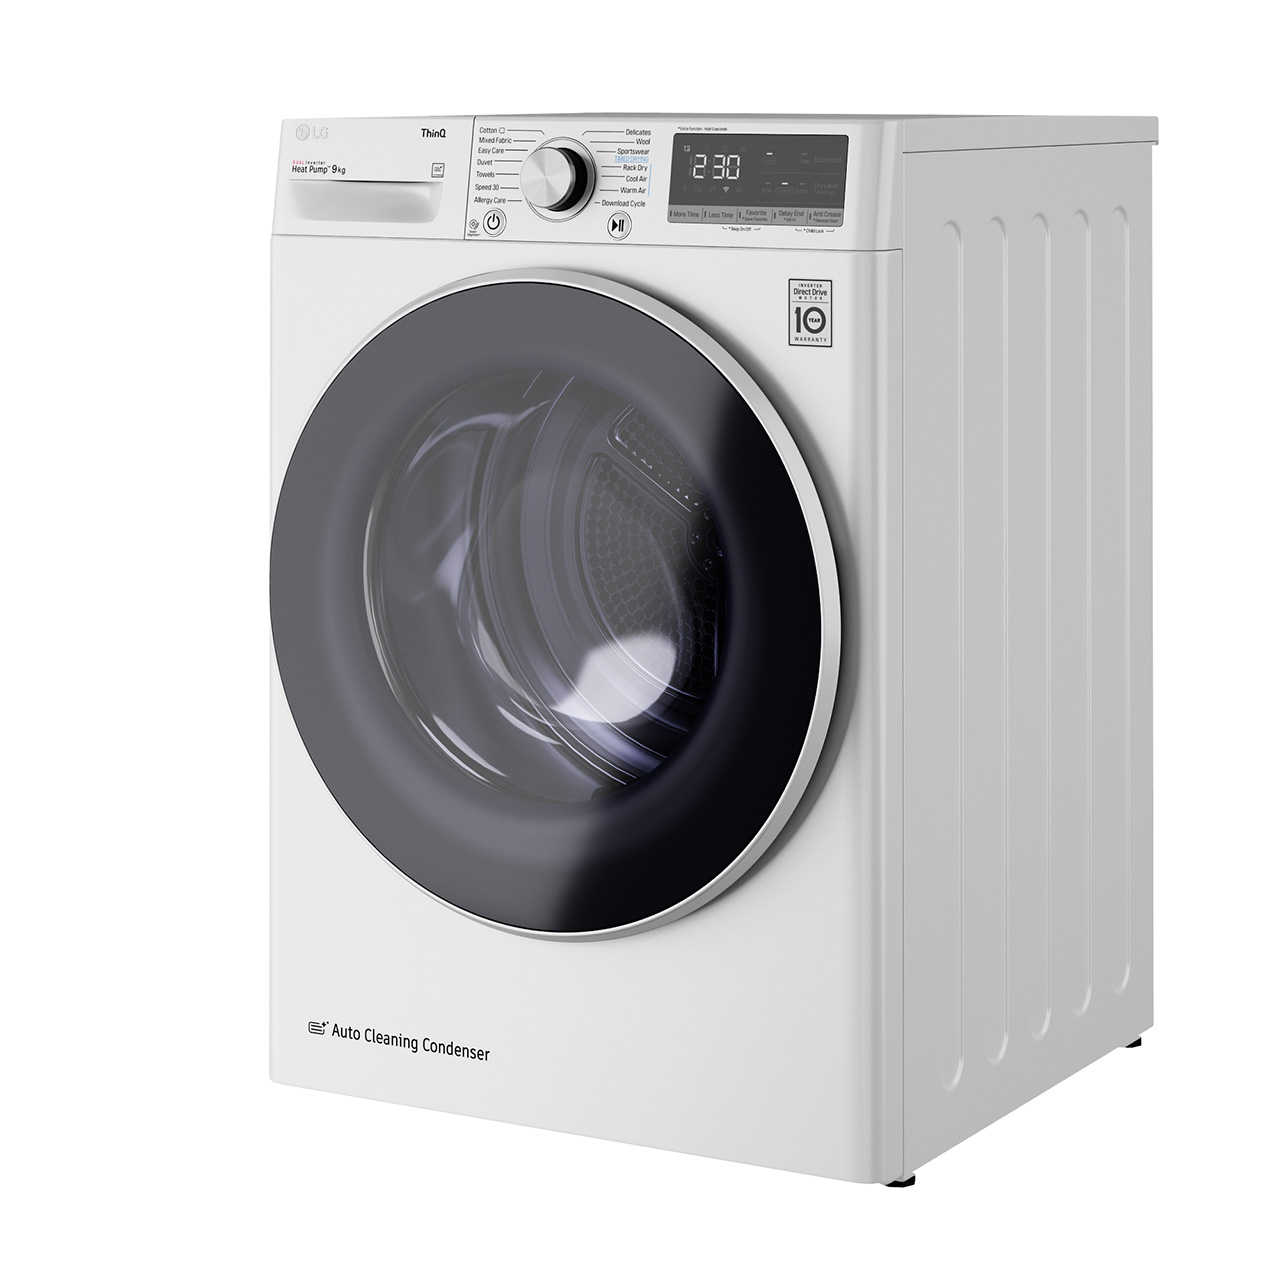 Dual Inverter Tumble Dryer 9 Kg A++ by LG